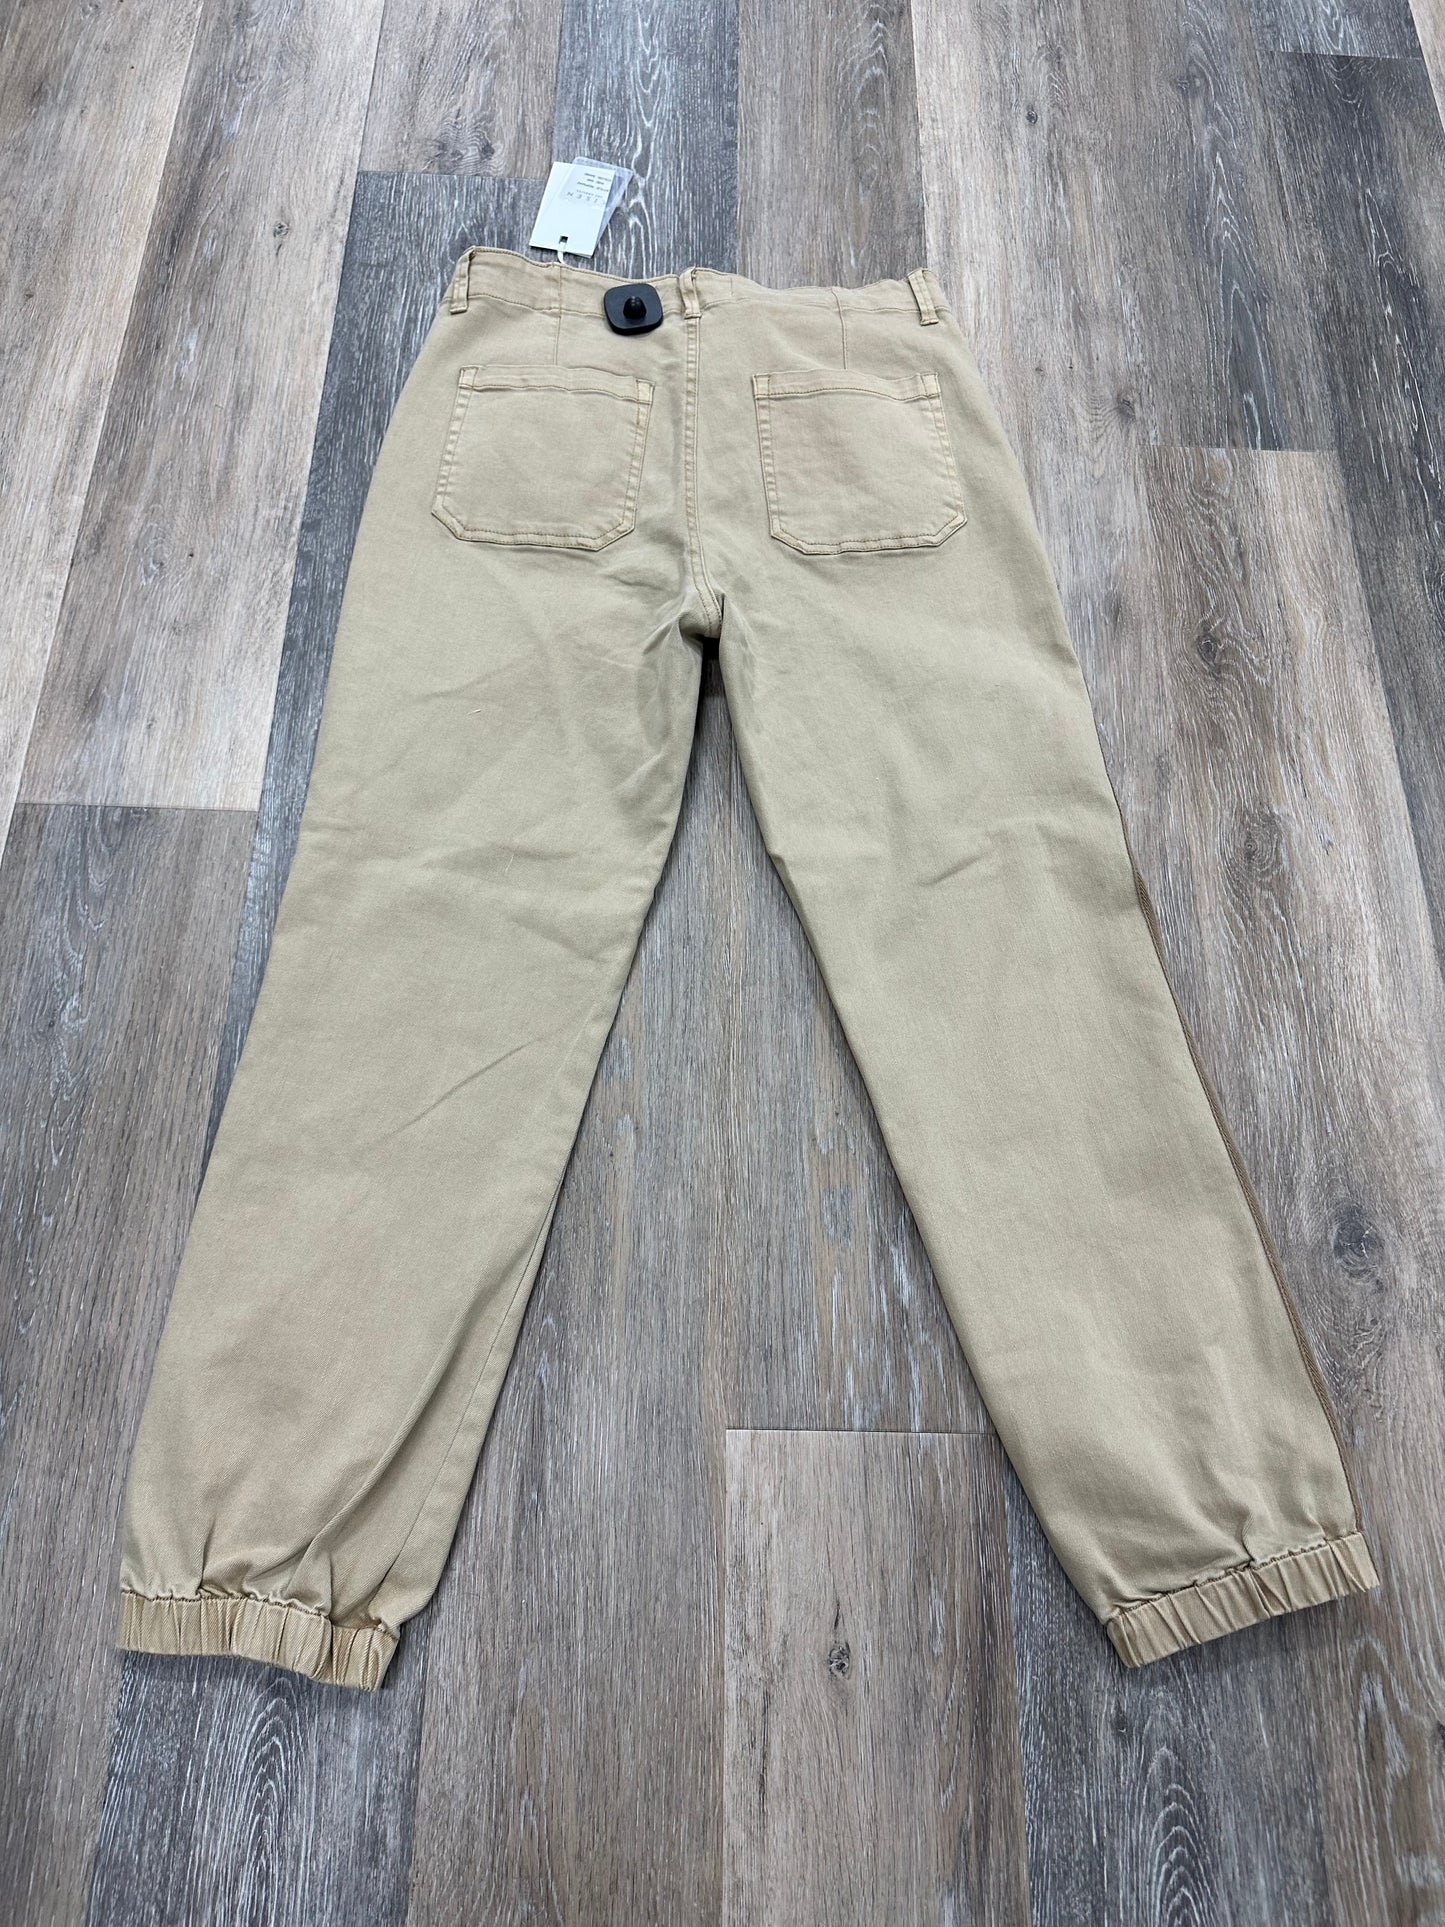 Pants Ankle By Risen  Size: 9